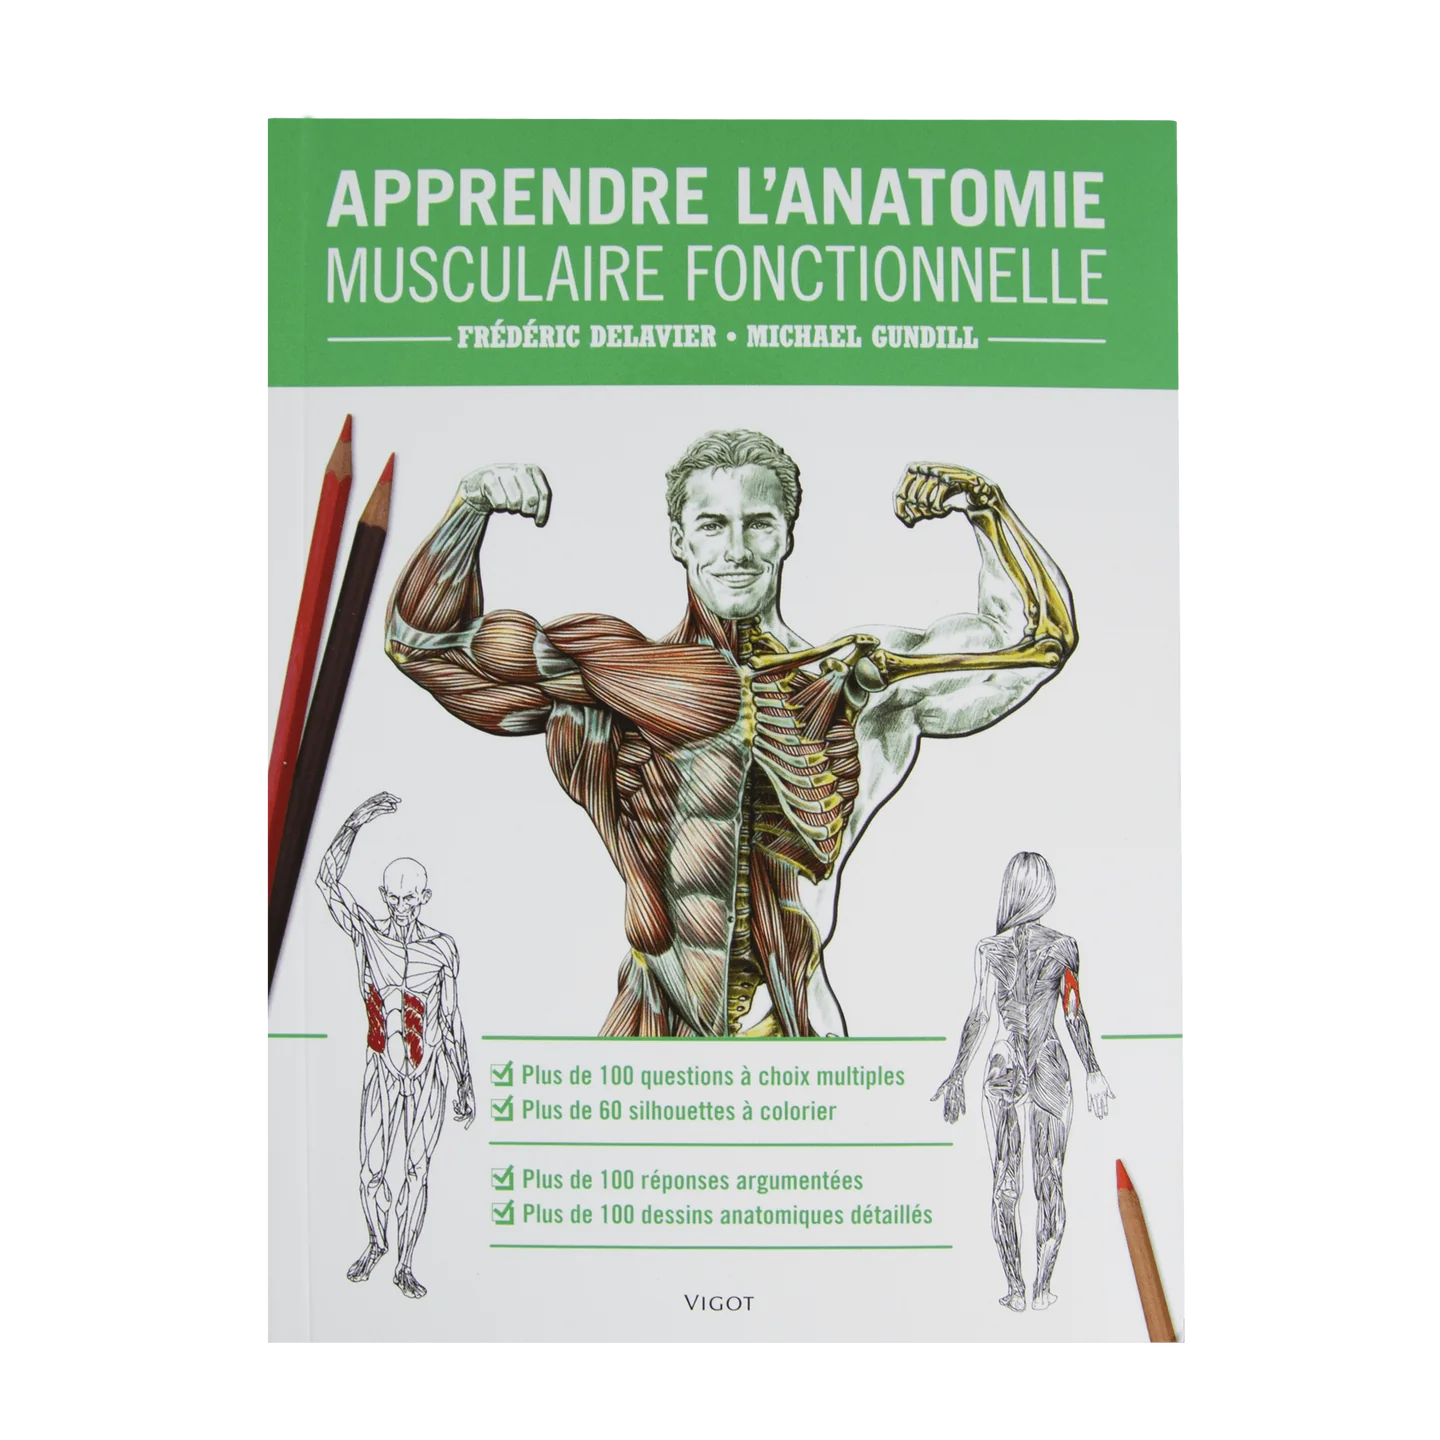 Book - Learn functional muscular anatomy